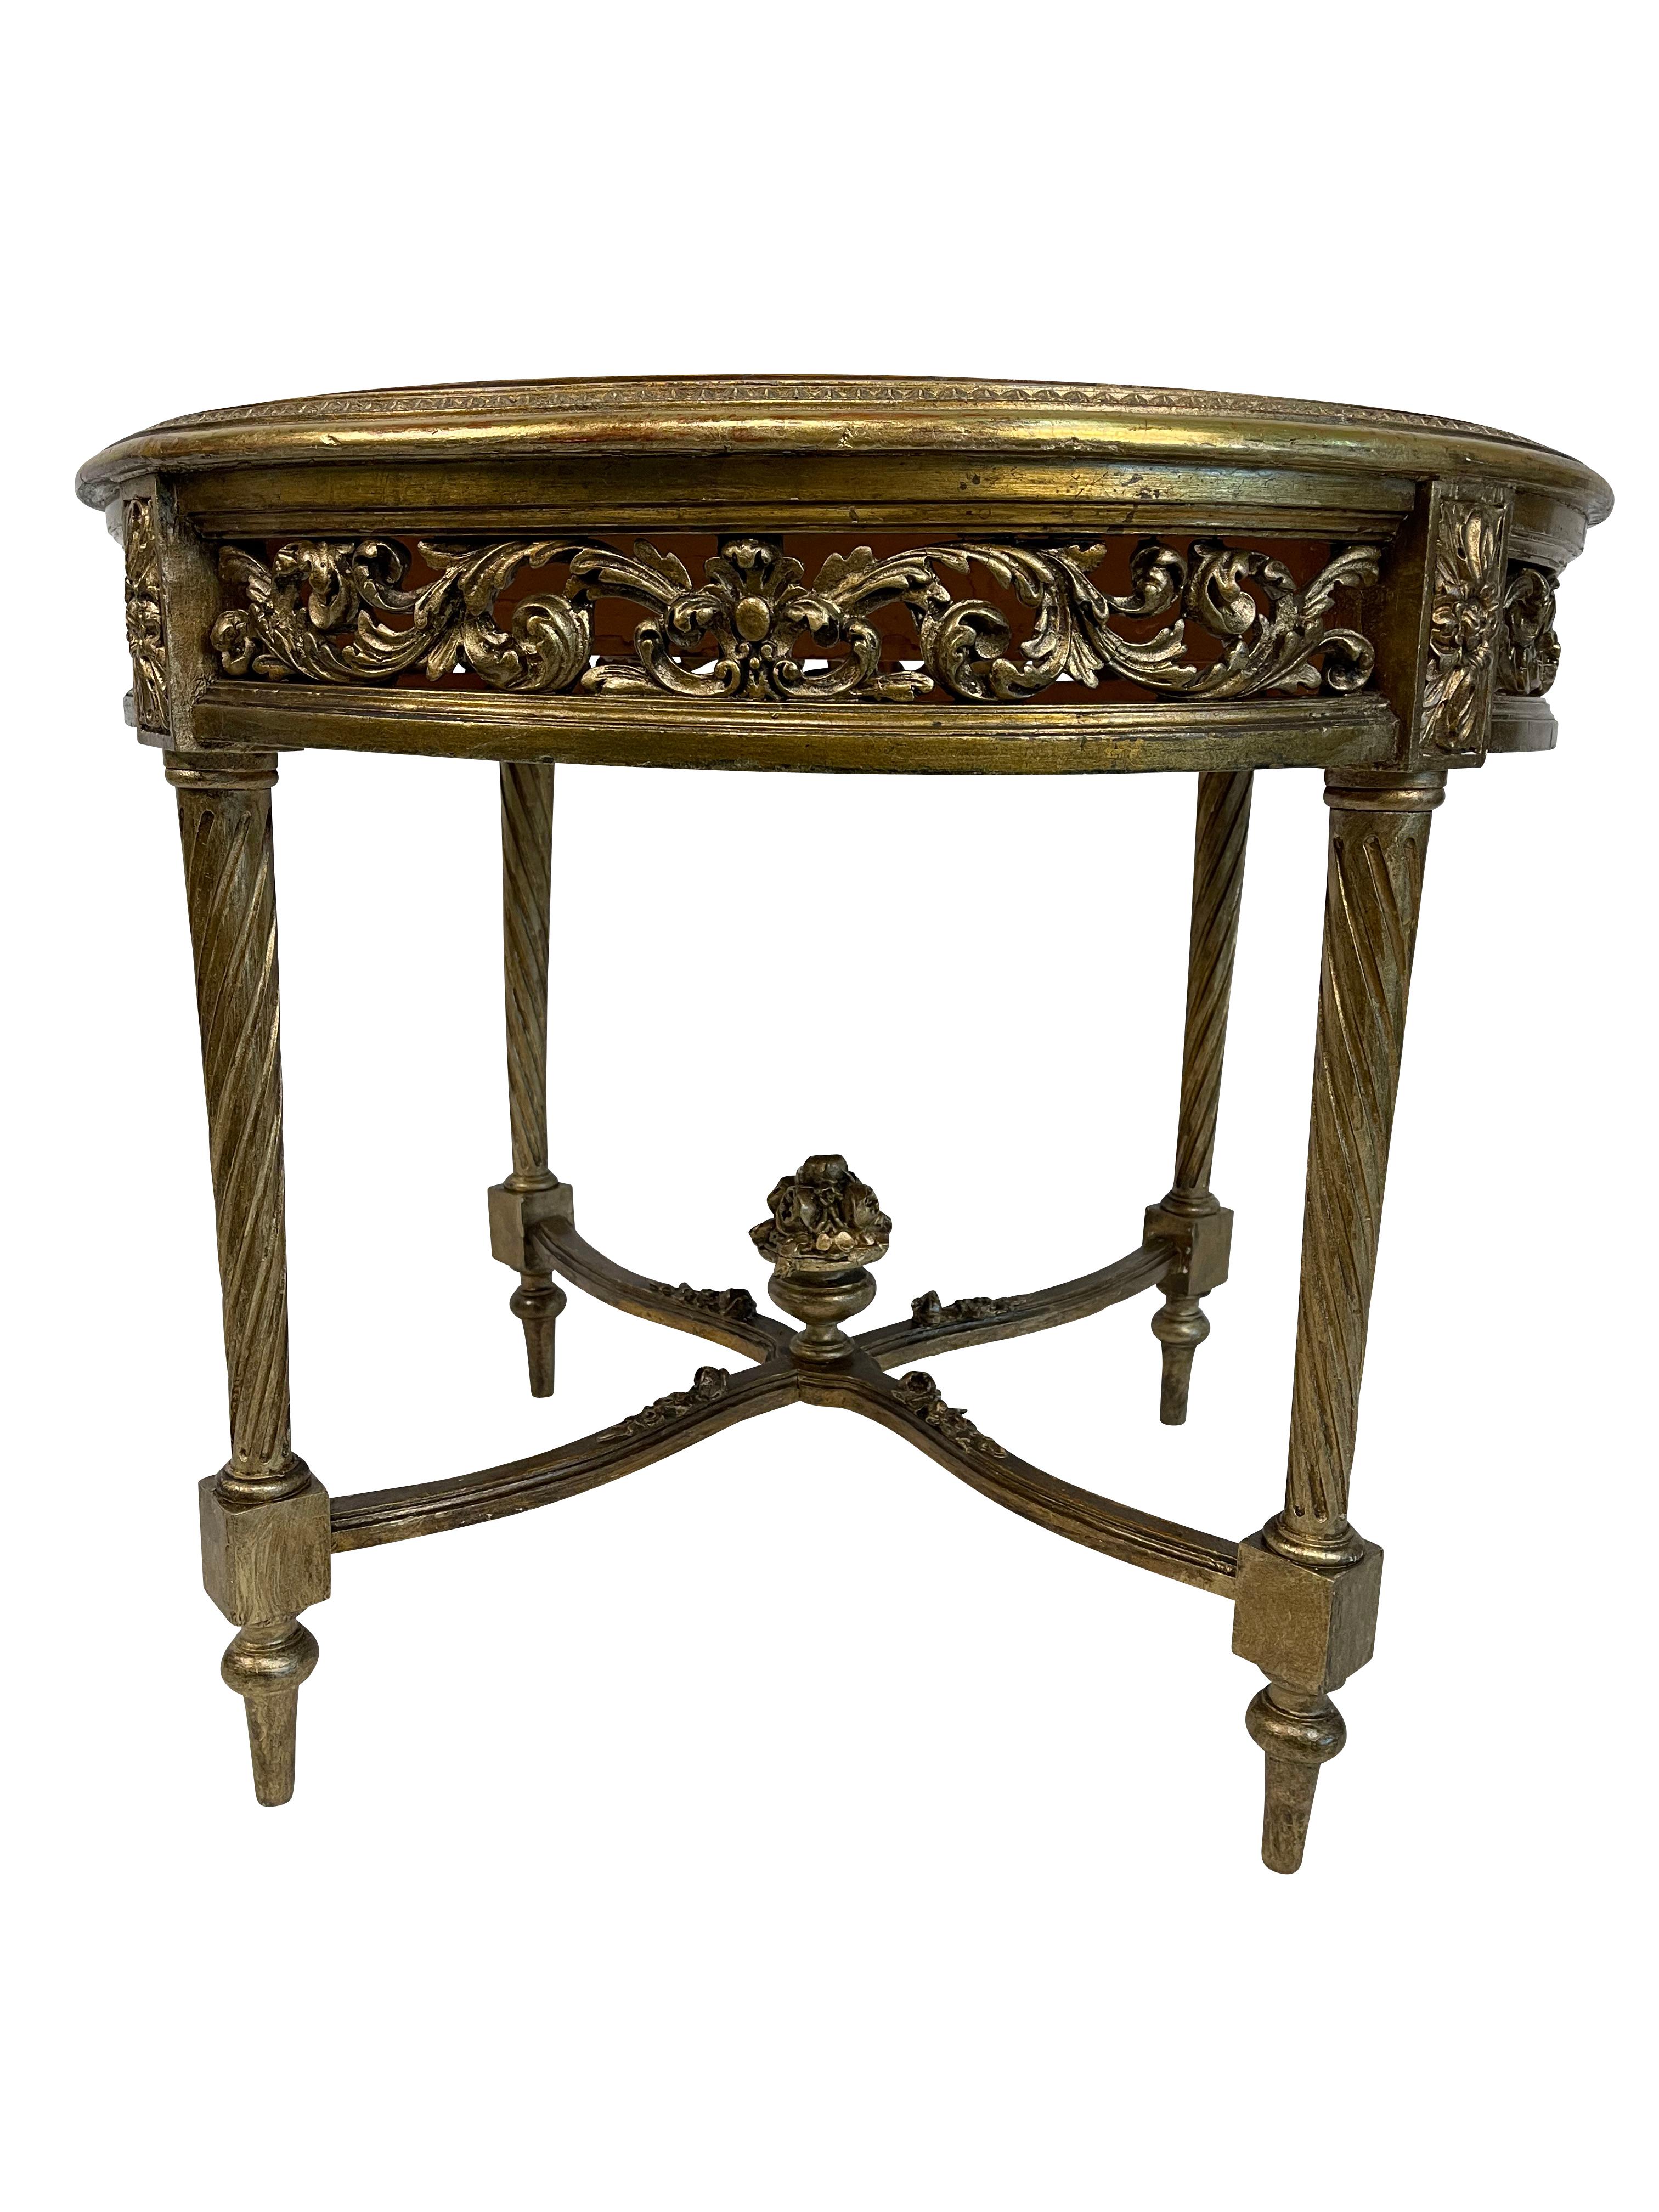 This table is an antique classical Italian/French round end or center table with a giltwood finish and marble top.  It is a solid strong construction with lovely scrolled fretwork around the table aprin. the center bracket at the bottom rises to a